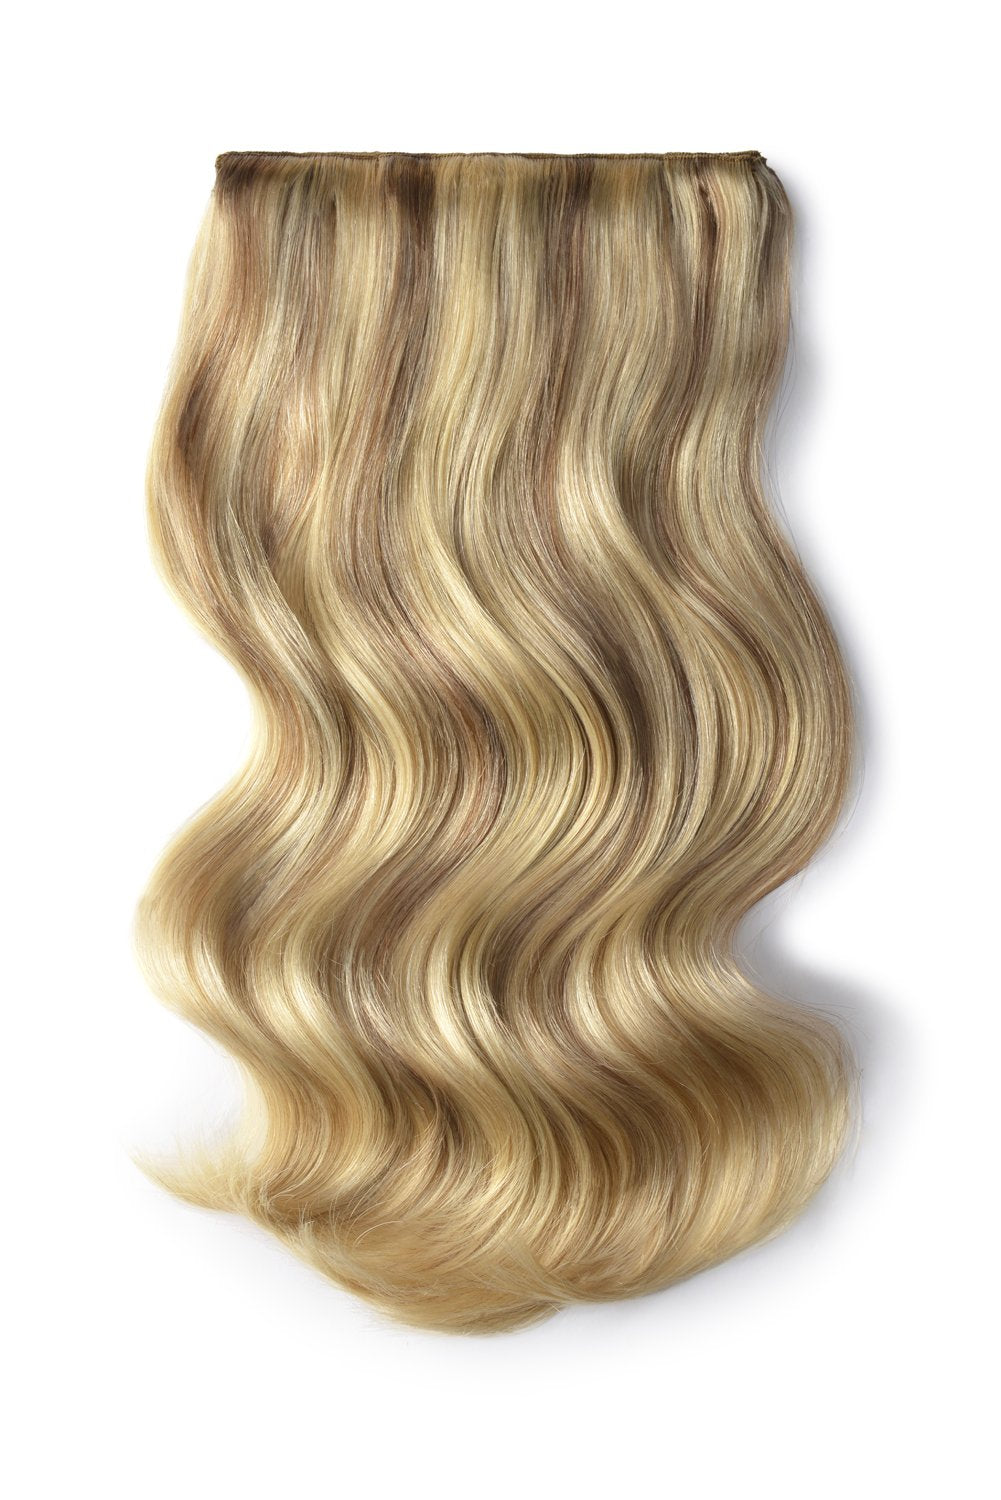 Double Wefted Full Head Remy Clip in Human Hair Extensions - Dark Blonde/Ash Blonde Mix (#14/22)